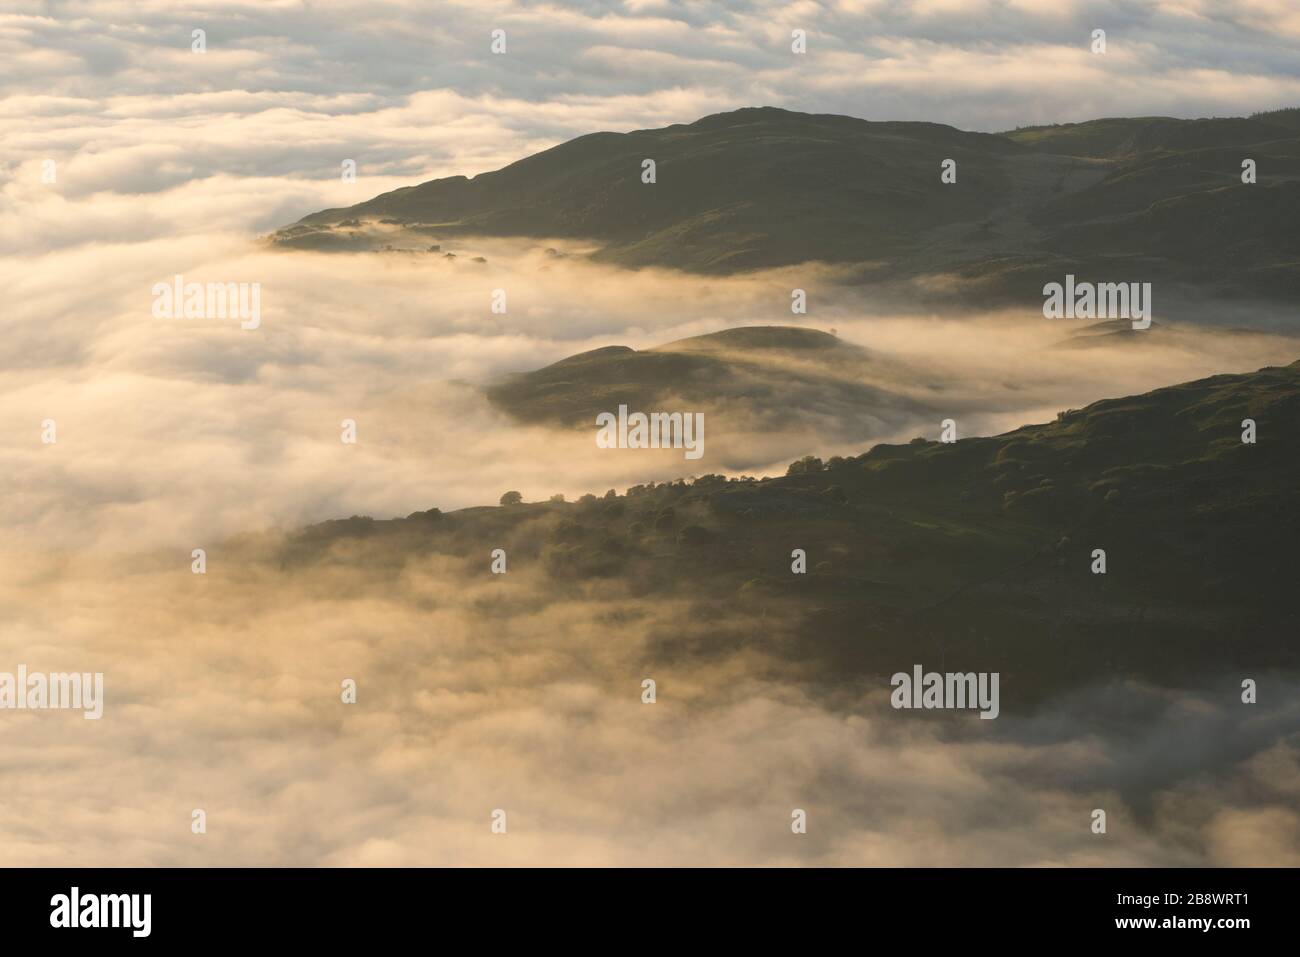 Mist in the valleys viewed from Cyfrwy, The Saddle, Cadair Idris, Snowdonia, North Wales, UK. Stock Photo